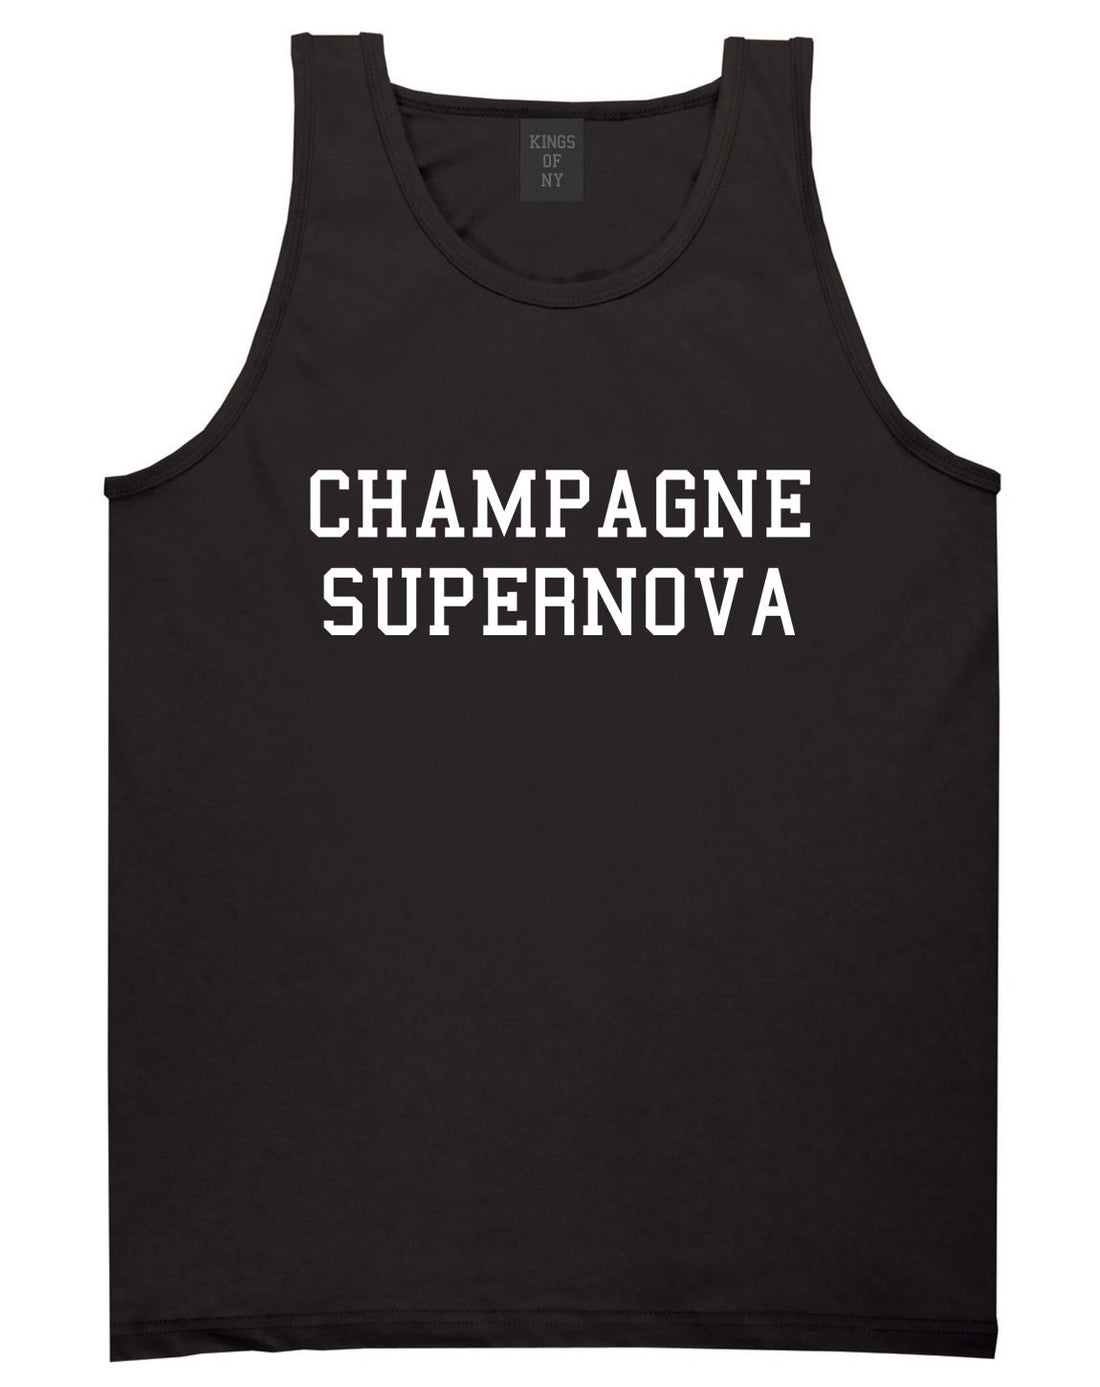 Champagne Supernova Tank Top in Black by Kings Of NY